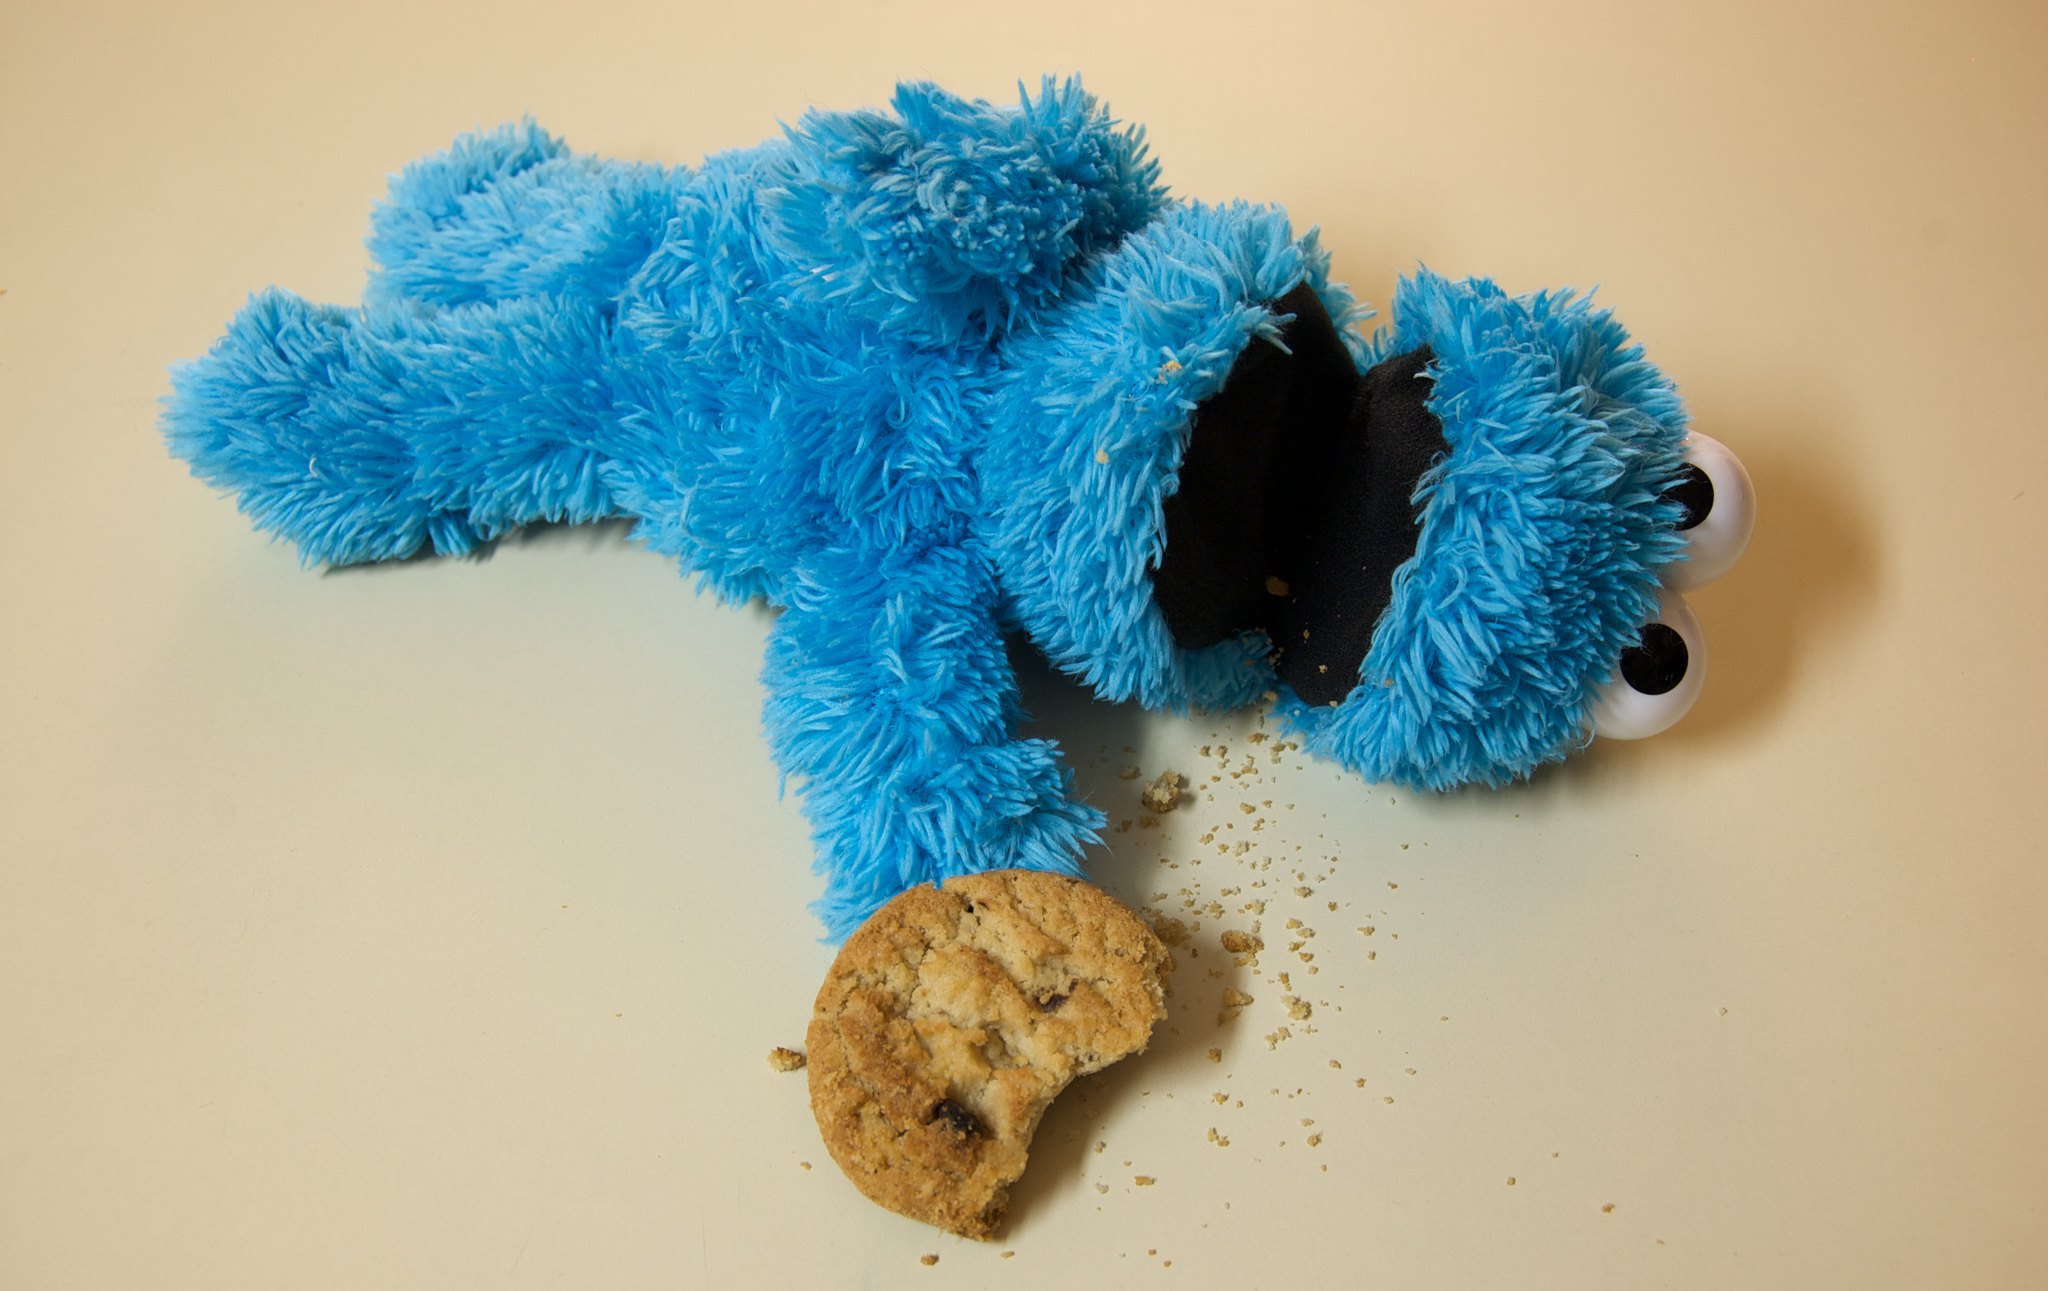 plush Cookie Monster lying on its back, apparently dead, cookie with one bite taken out left at tip of outstretched hand